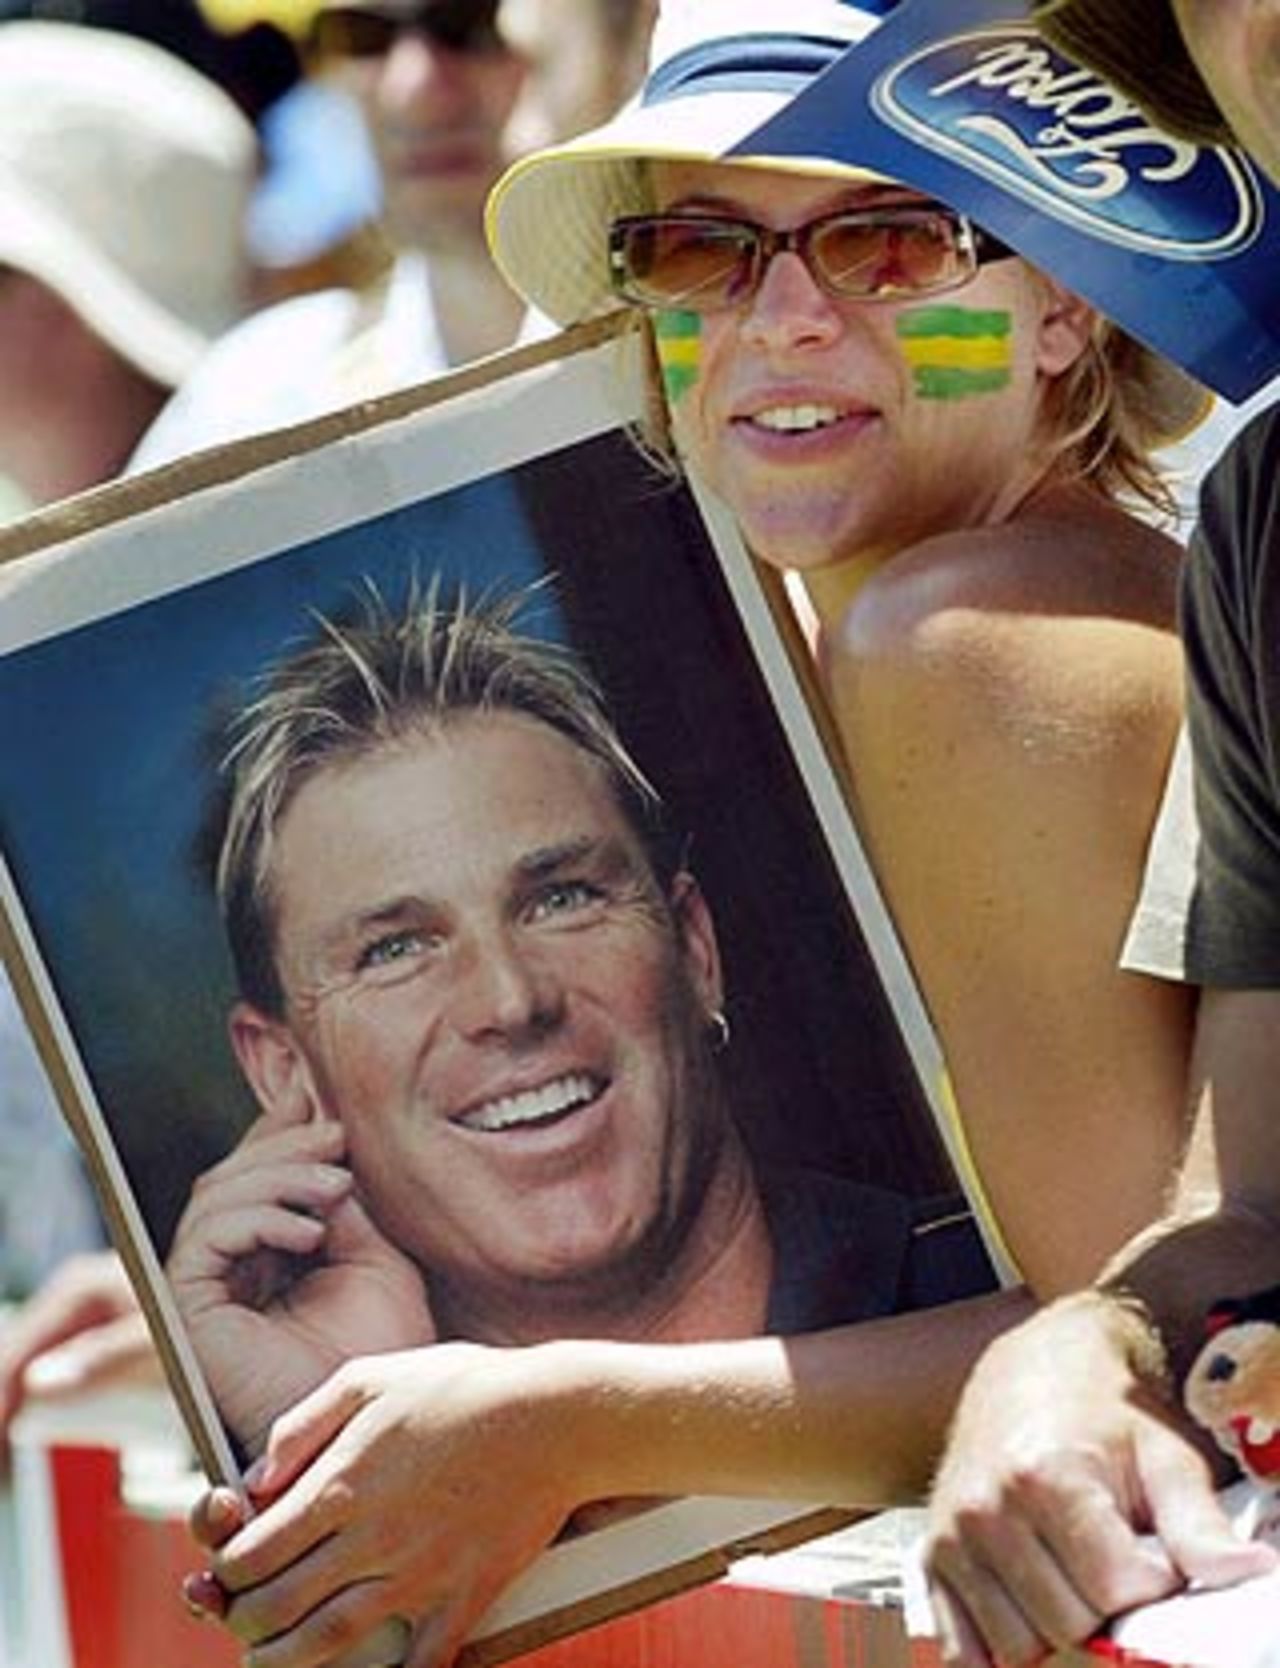 Shane Warne in the arms of a fan, 3rd Test, Melbourne, 2nd day, December 27, 2003